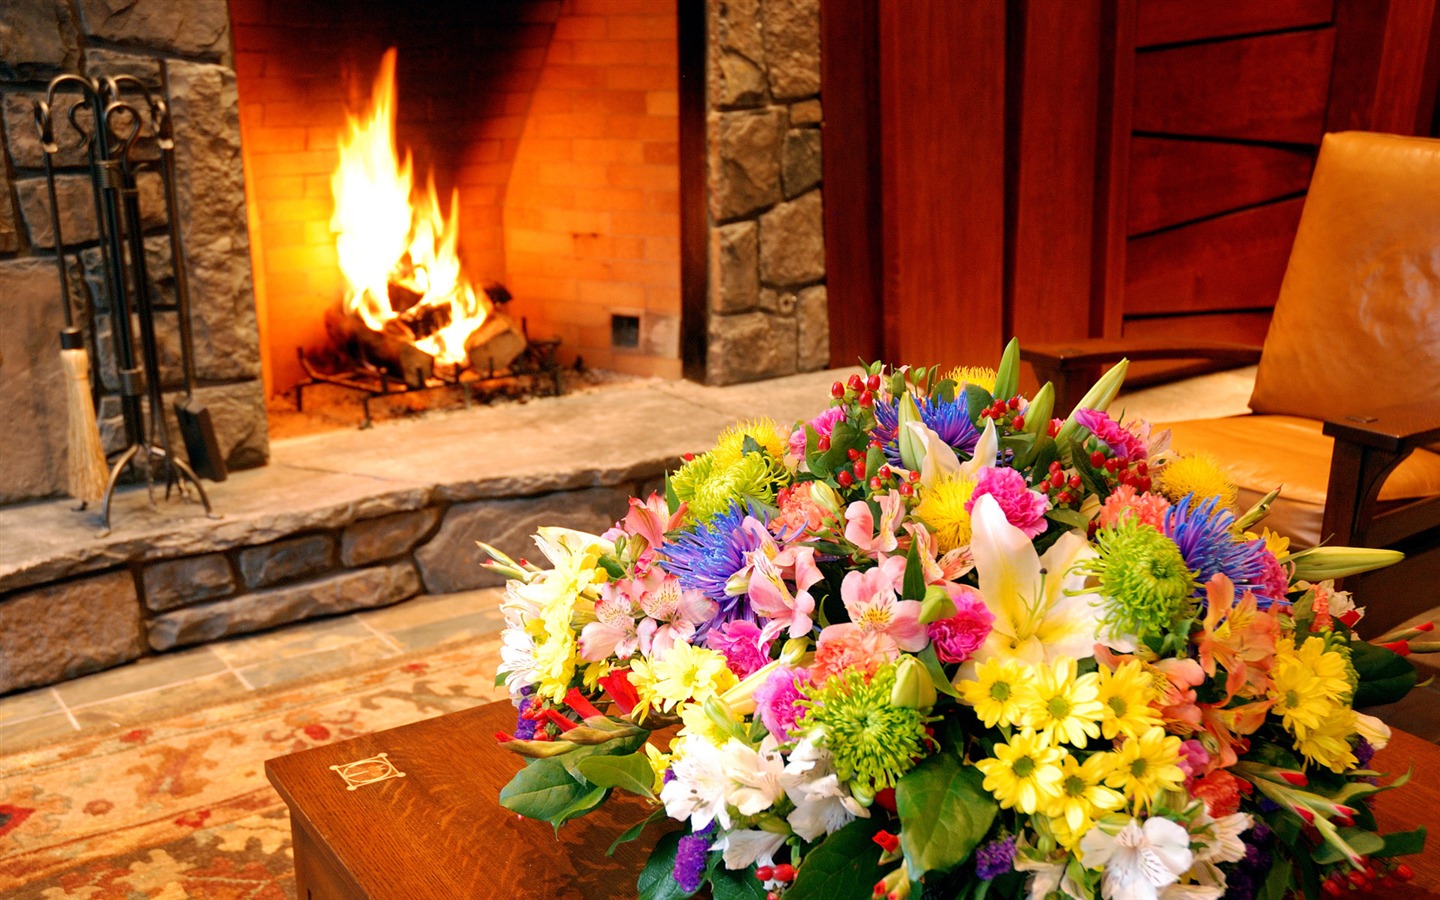 Western-style family fireplace wallpaper (1) #1 - 1440x900